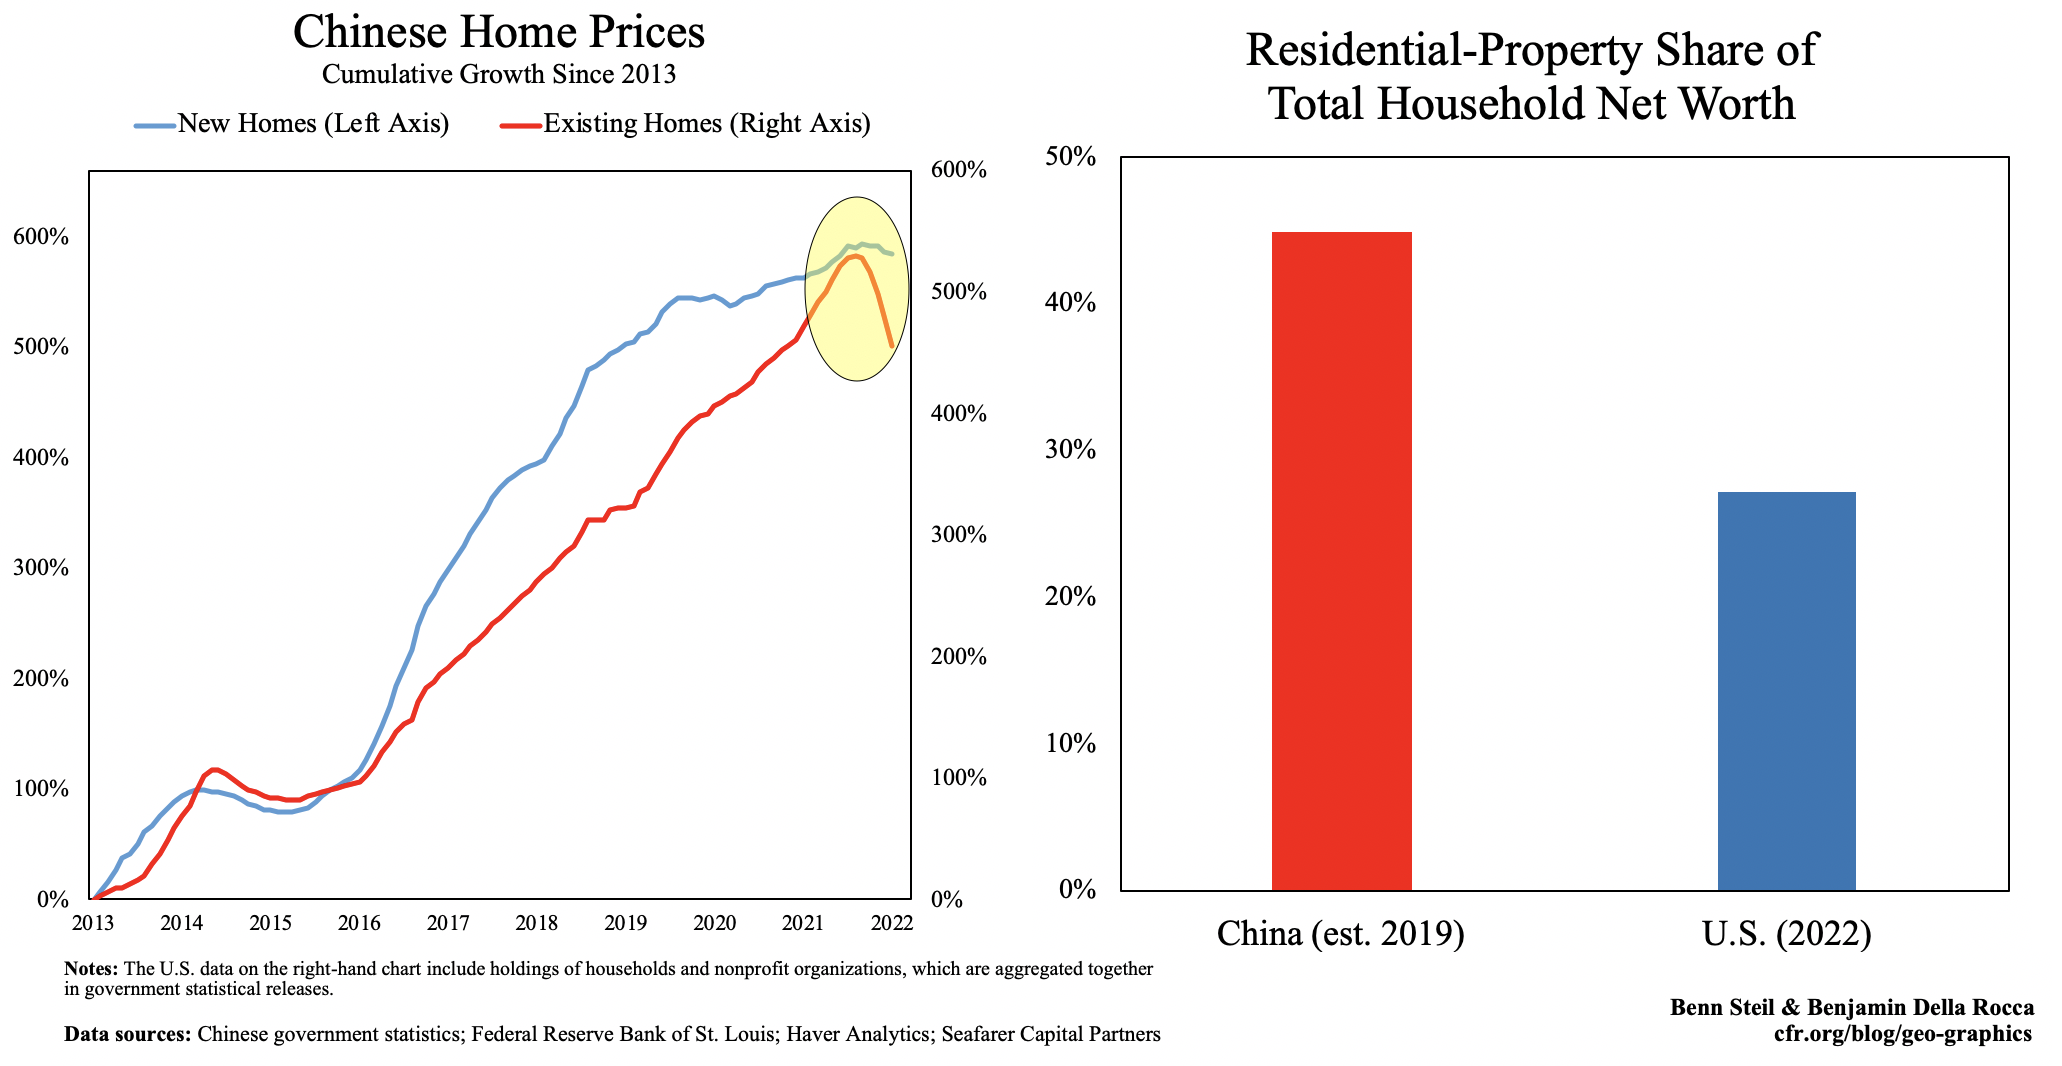 Chinese Home Prices and Residential-Property Share of Total Household Net Worth